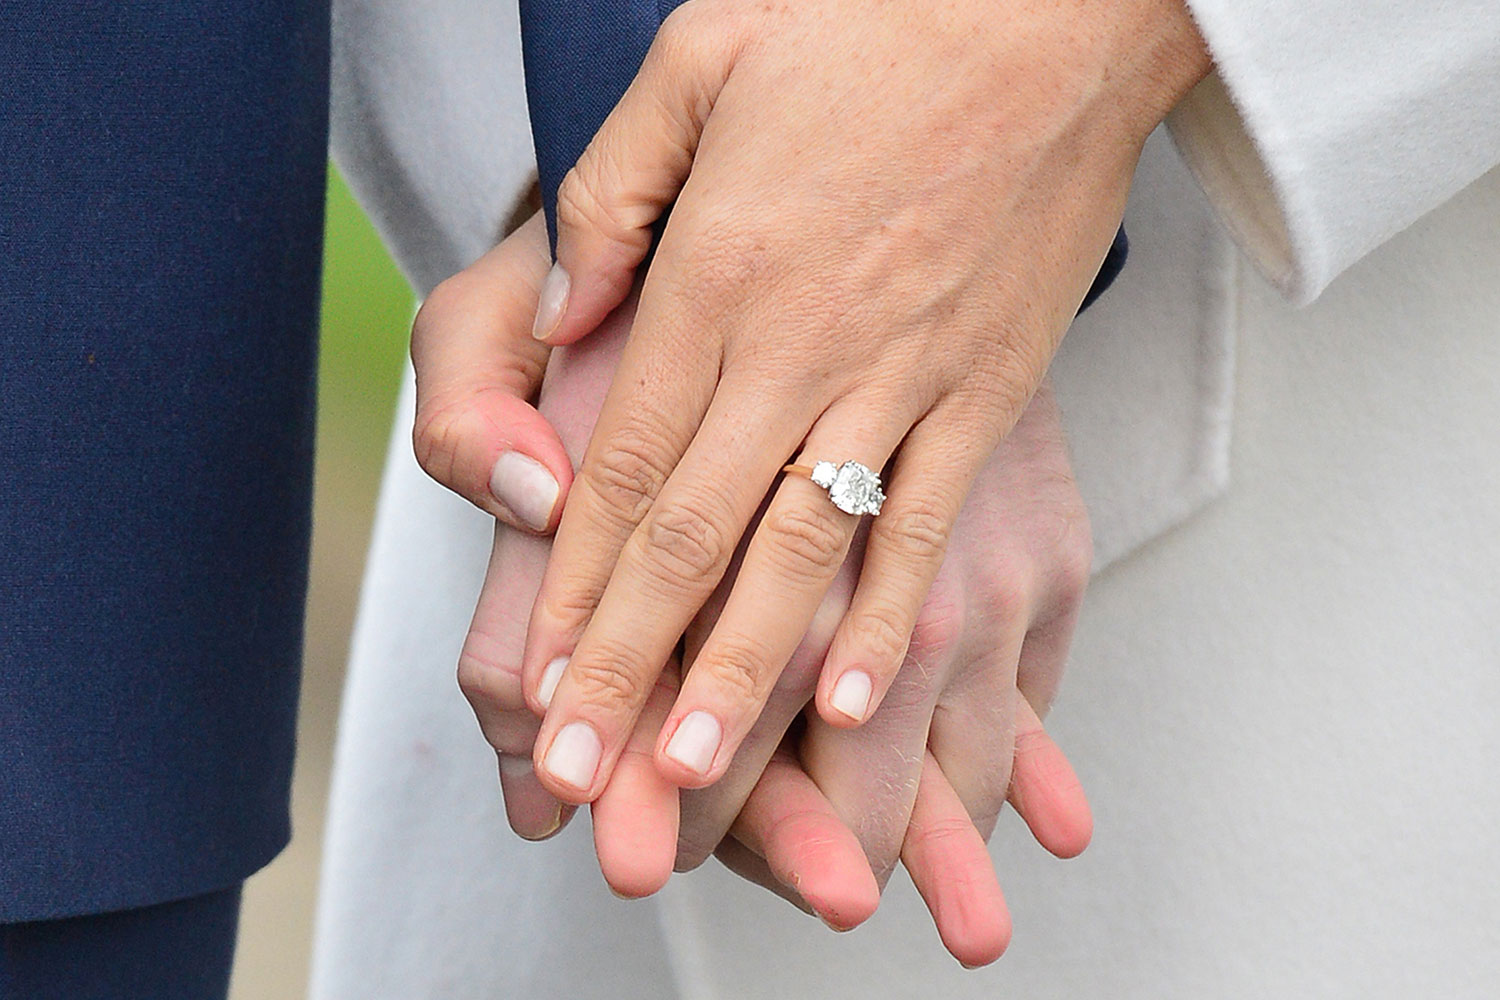 You Can Buy A Replica Of Meghan Markle’s Engagement Ring For $55 From Buckingham Palace